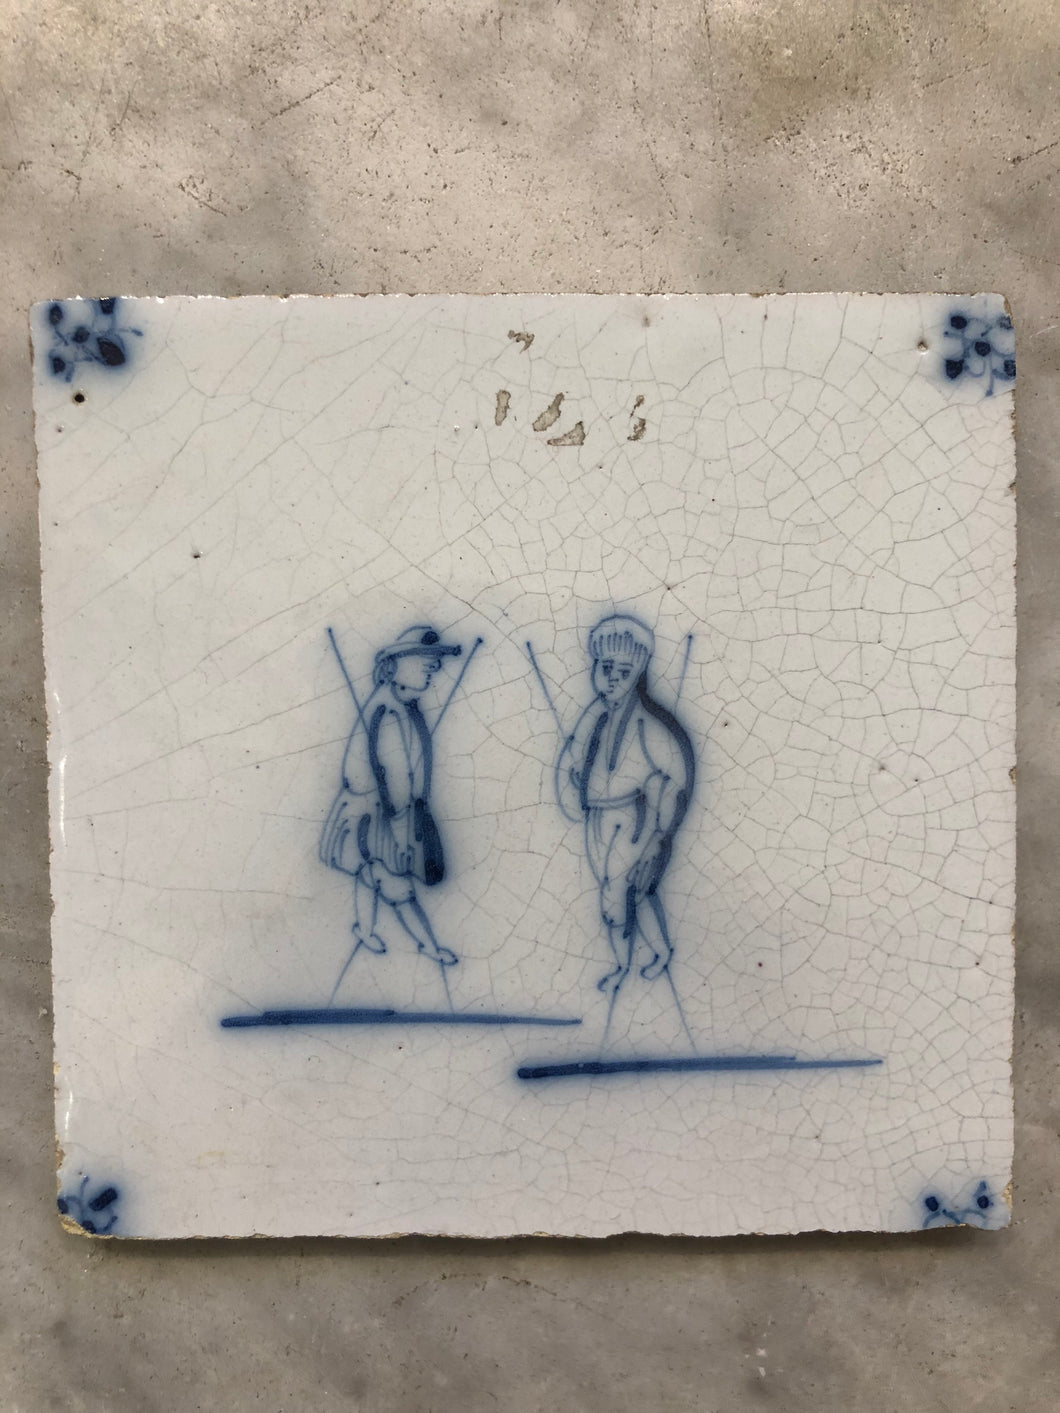 18th century Delft handpainted dutch tile with children playing